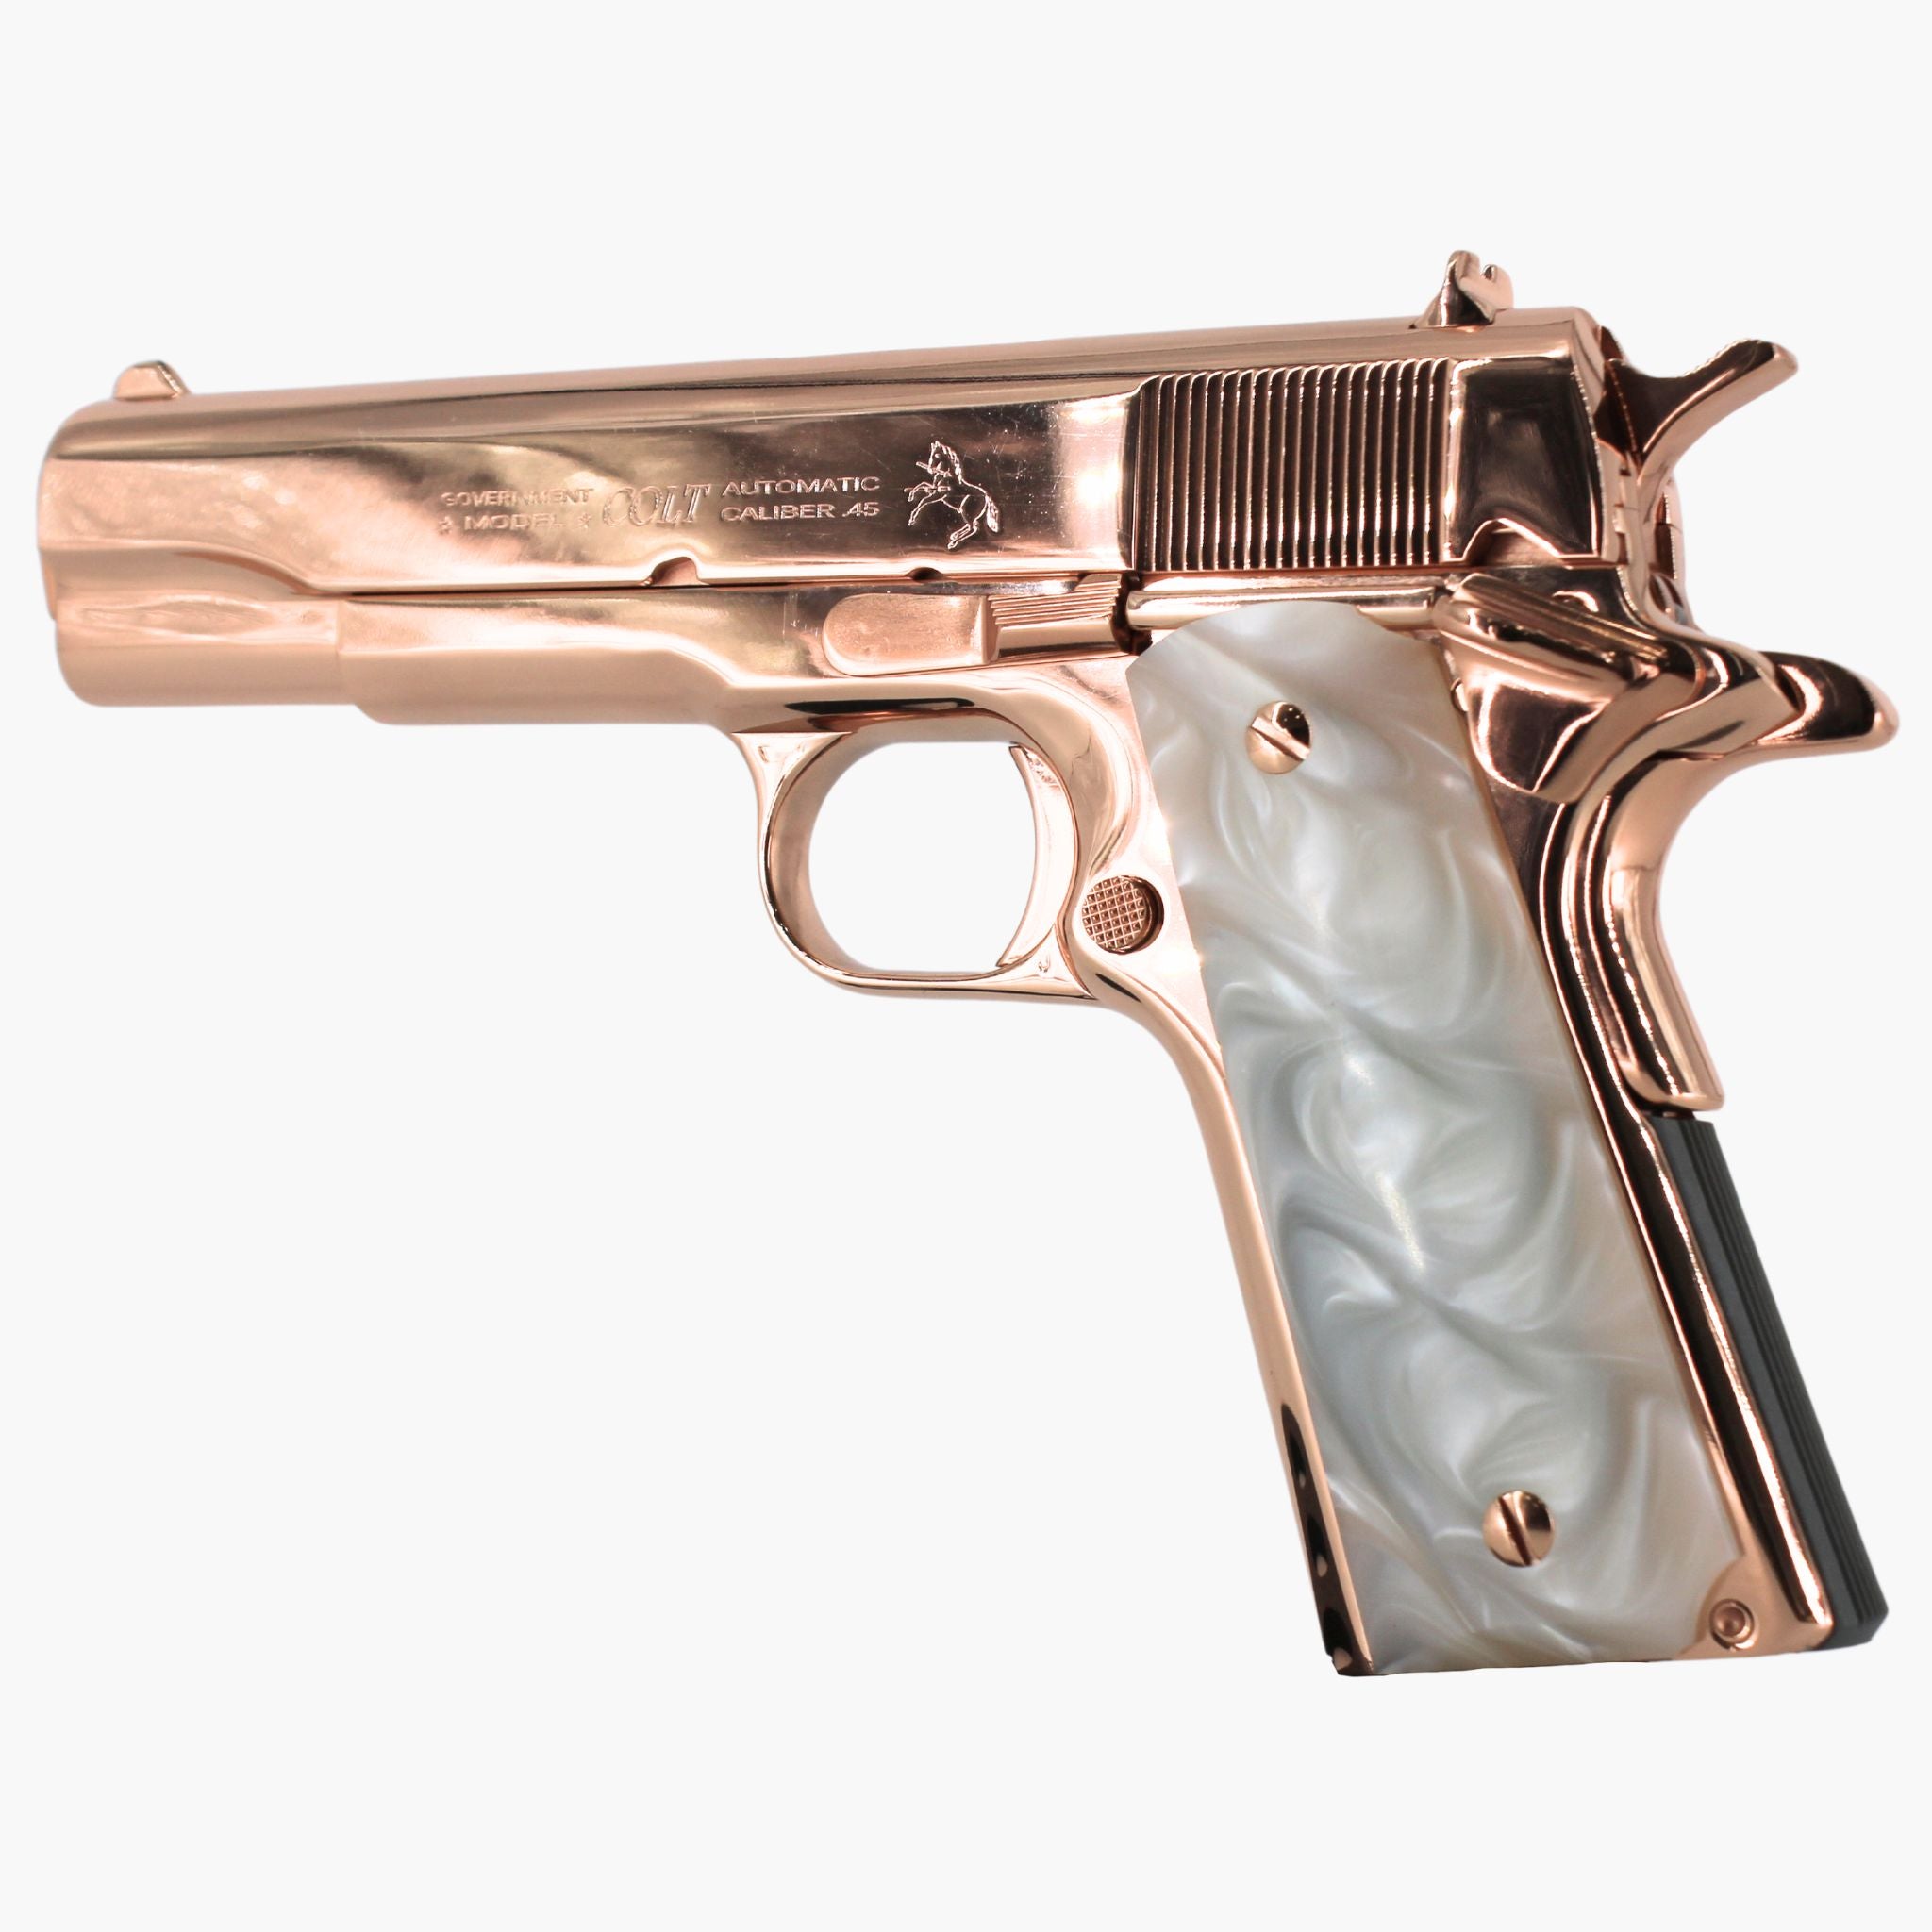 Colt 1911 Government, 45ACP, 18 karat Rose Gold Plated, Hogue White Pearlized Grips, 4874873176166, rose gold pistols, rose gold guns